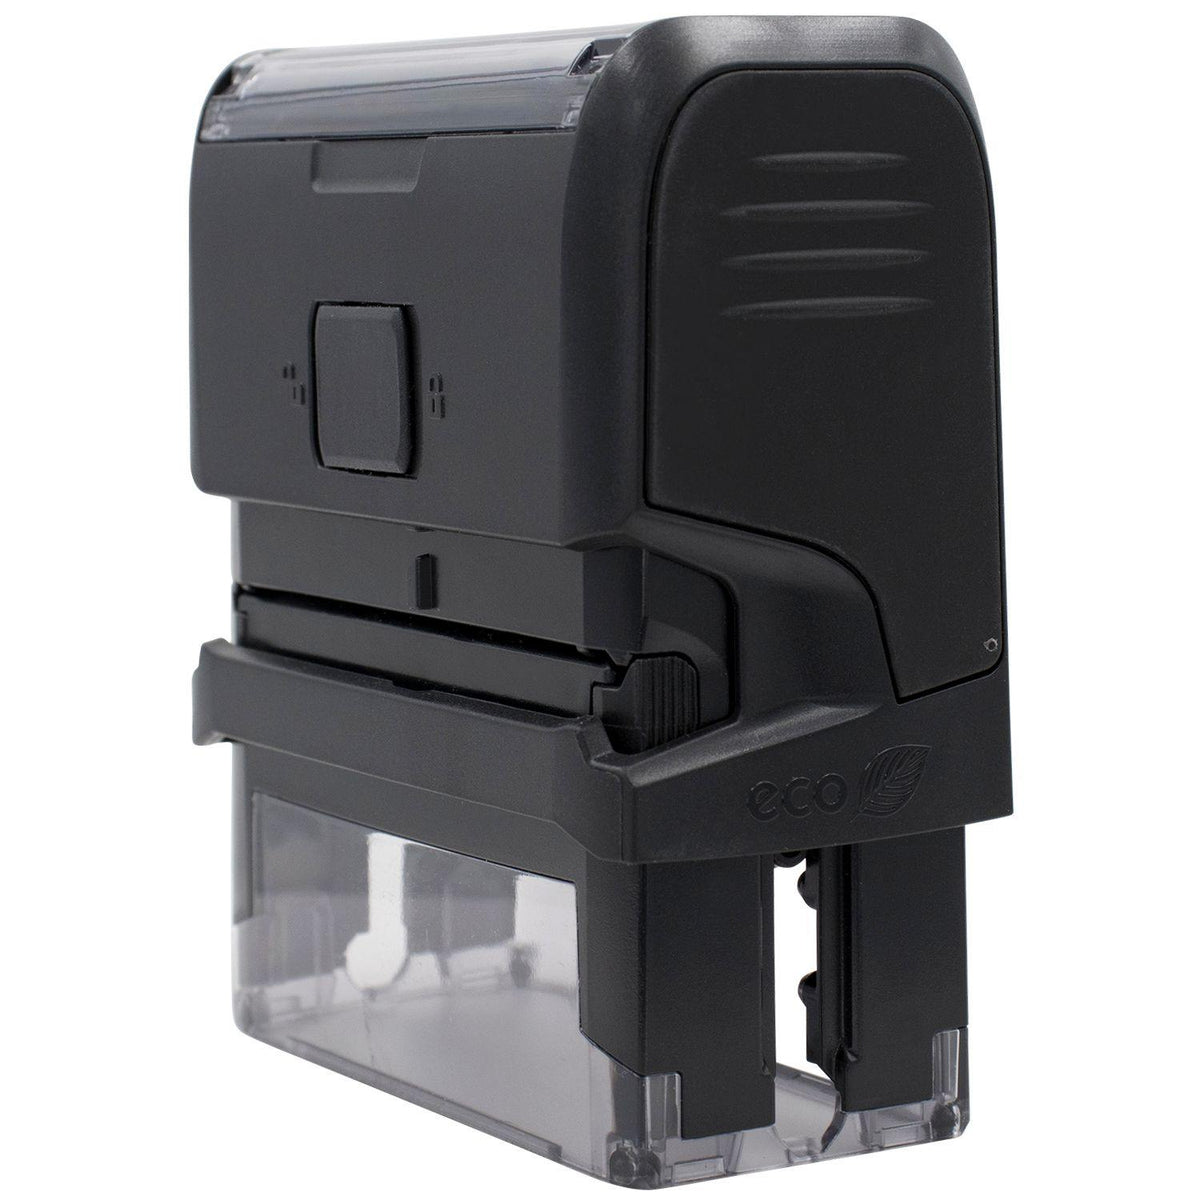 Self-Inking Deceased Stamp - Engineer Seal Stamps - Brand_Trodat, Impression Size_Small, Stamp Type_Self-Inking Stamp, Type of Use_Medical Office